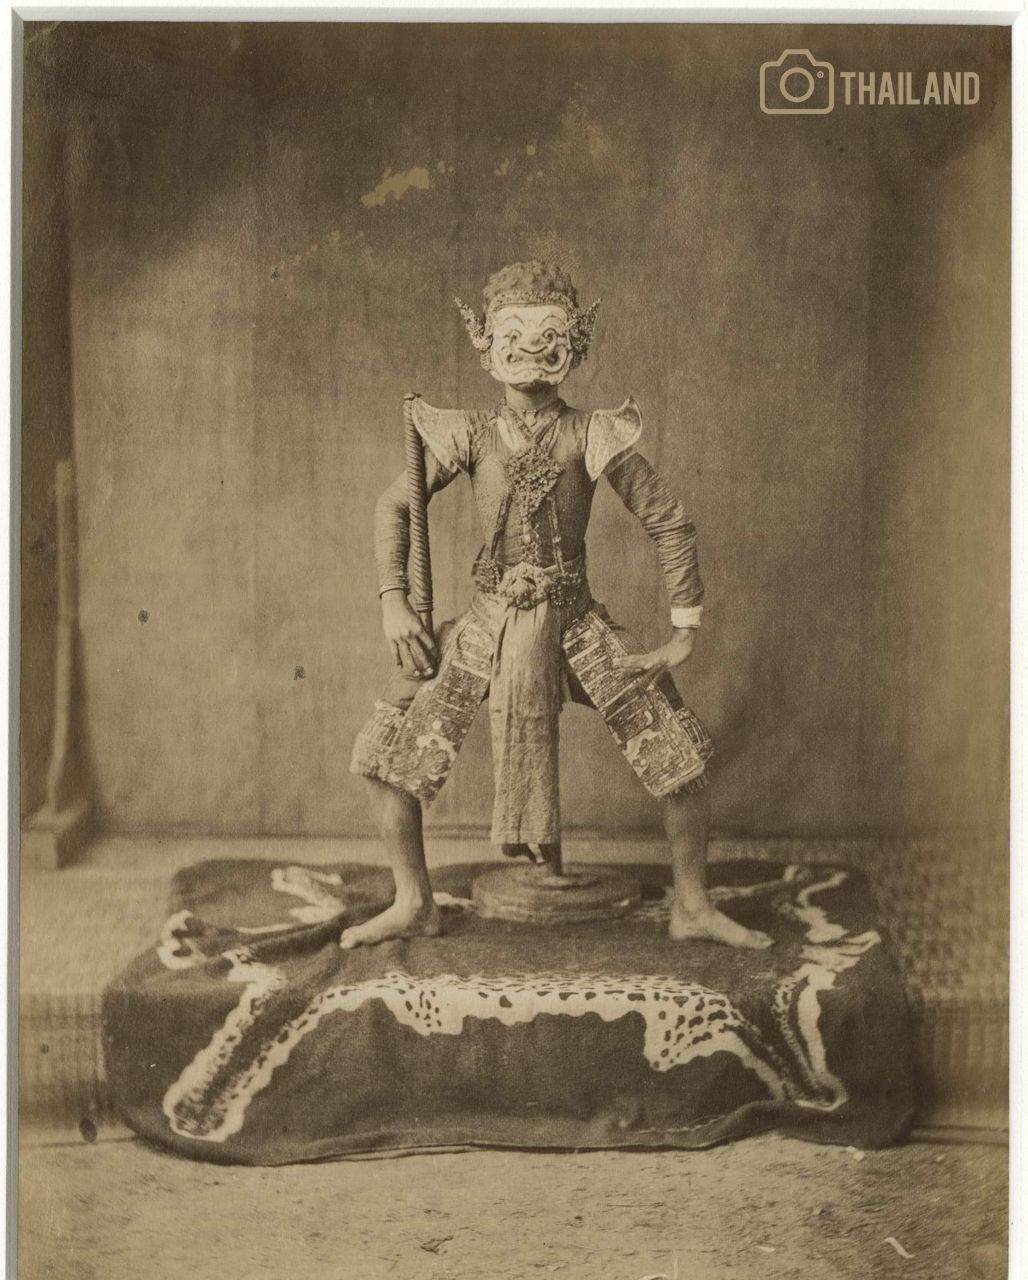 🇹🇭 Thailand:The Khon actor from Photograph album of Siam, 1865-1866.